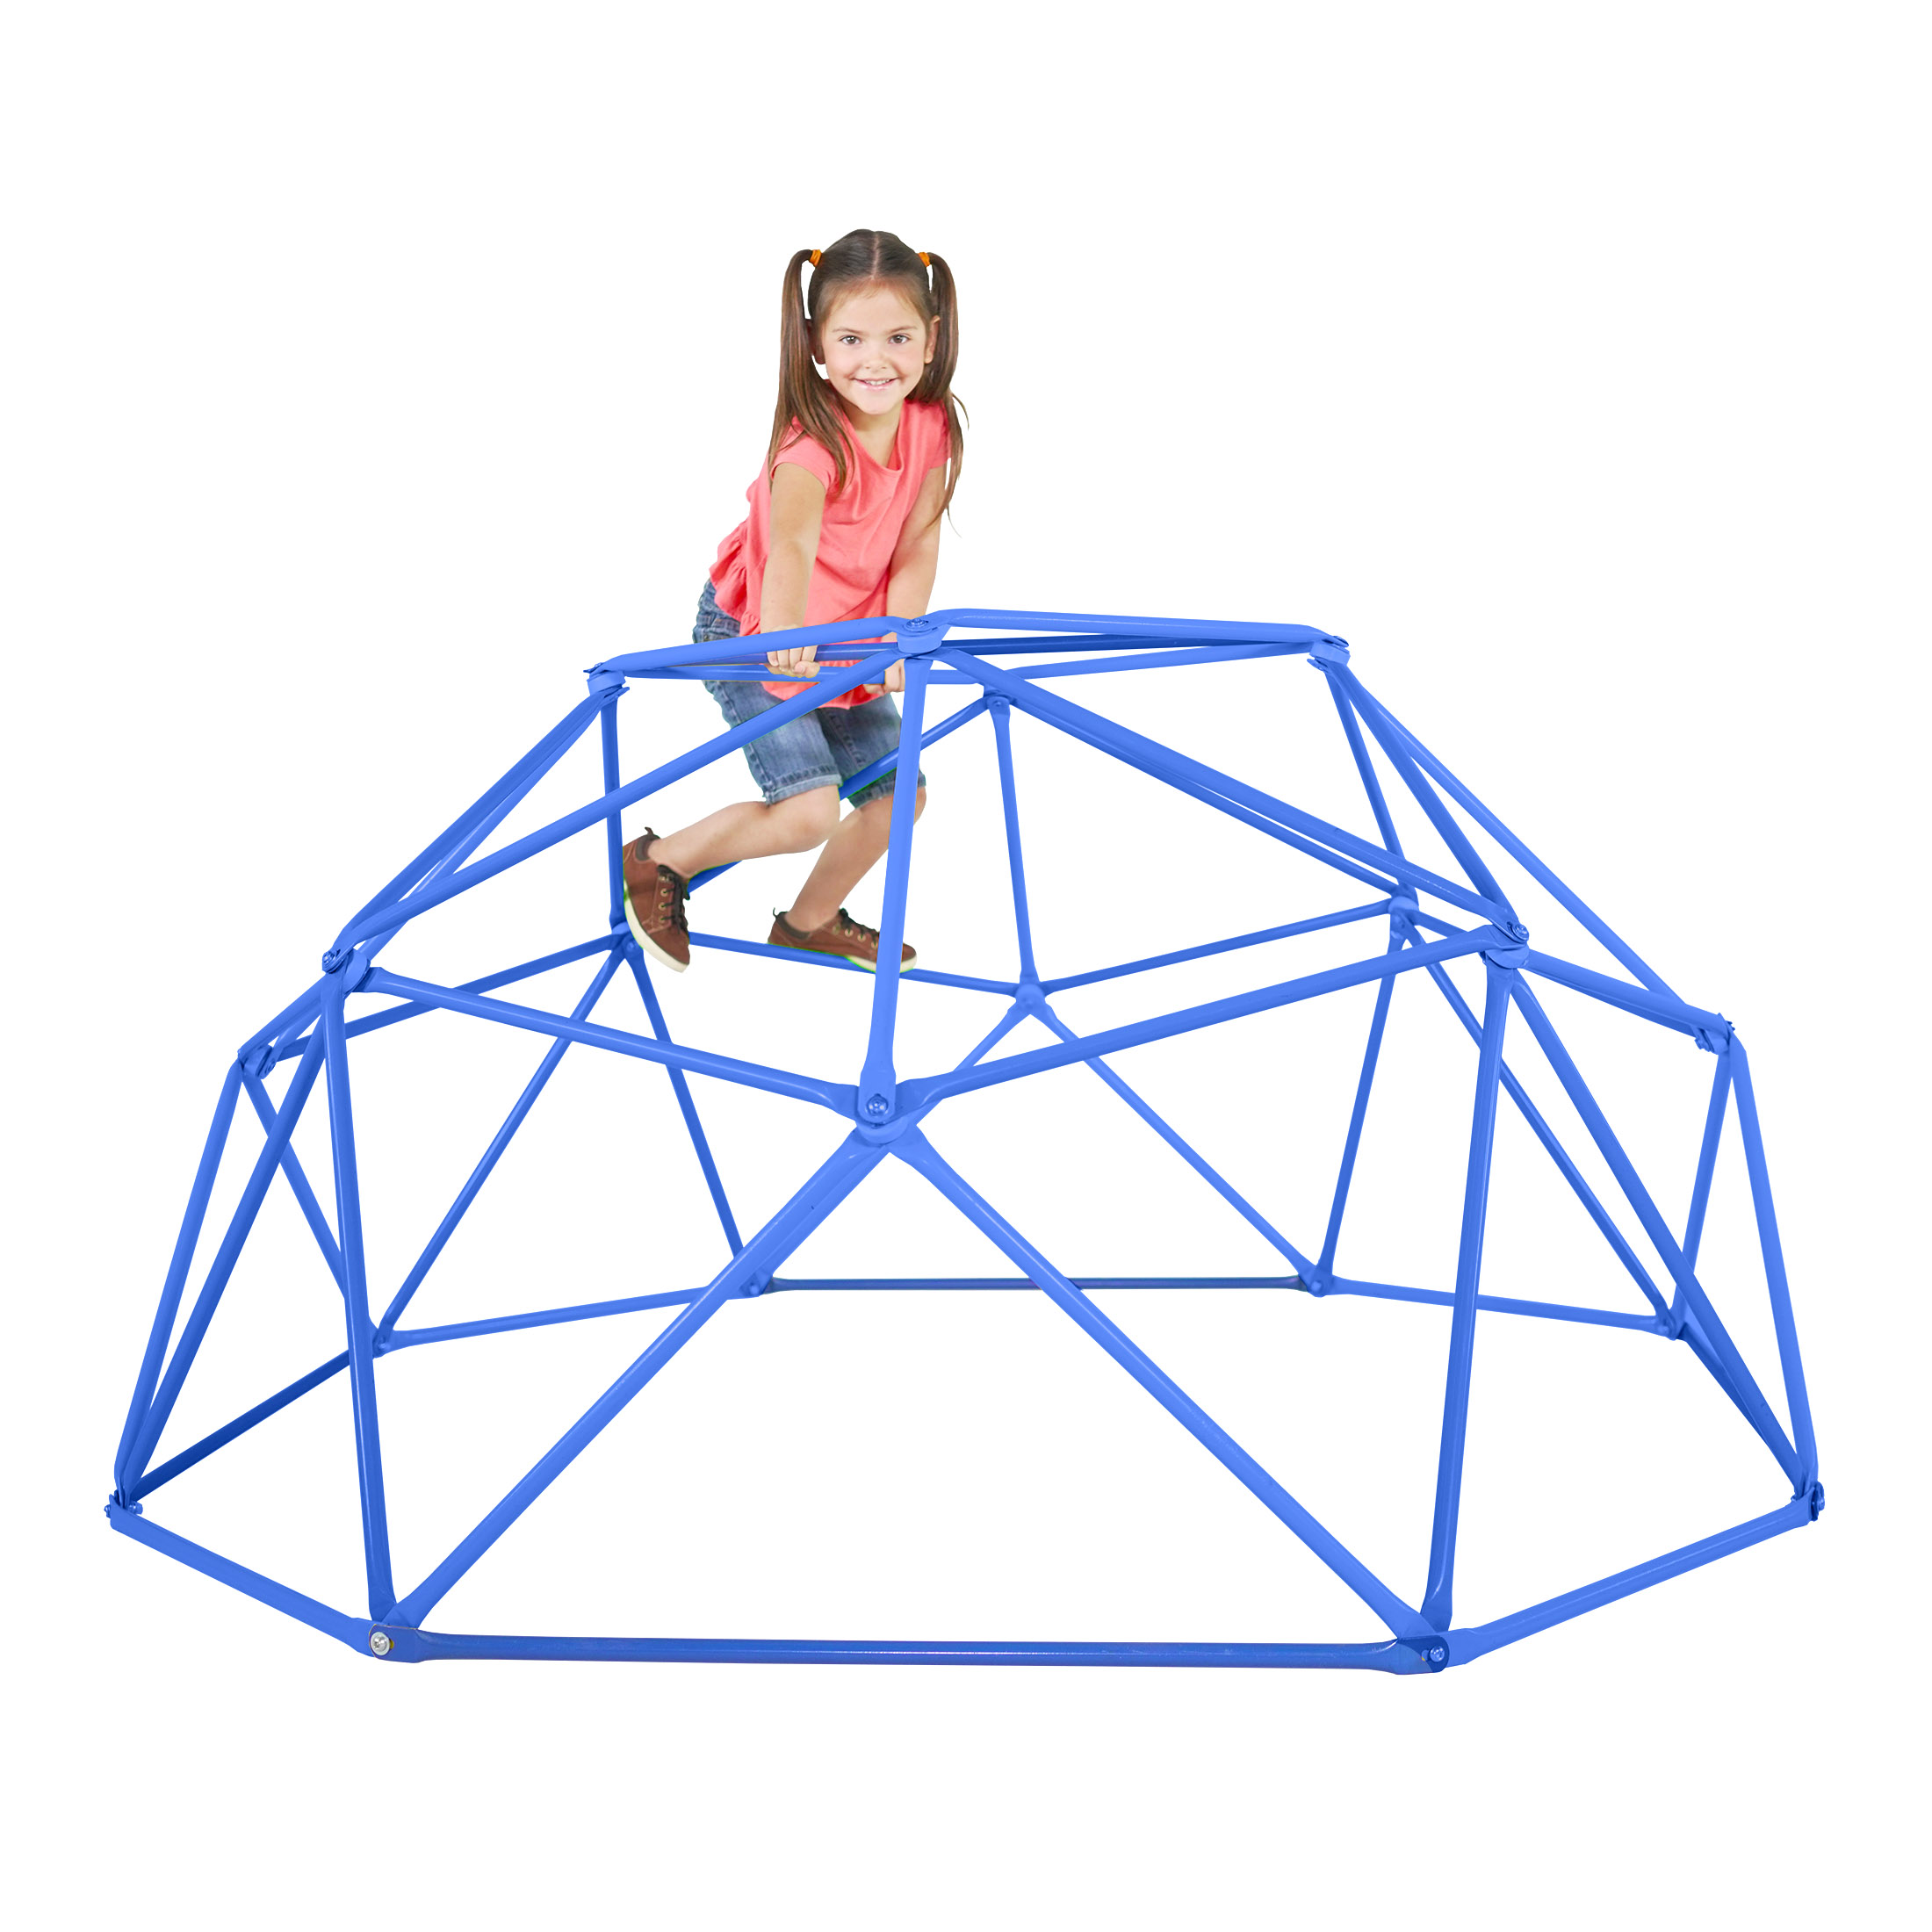 Sportspower Dome Climber with Cover - image 1 of 10